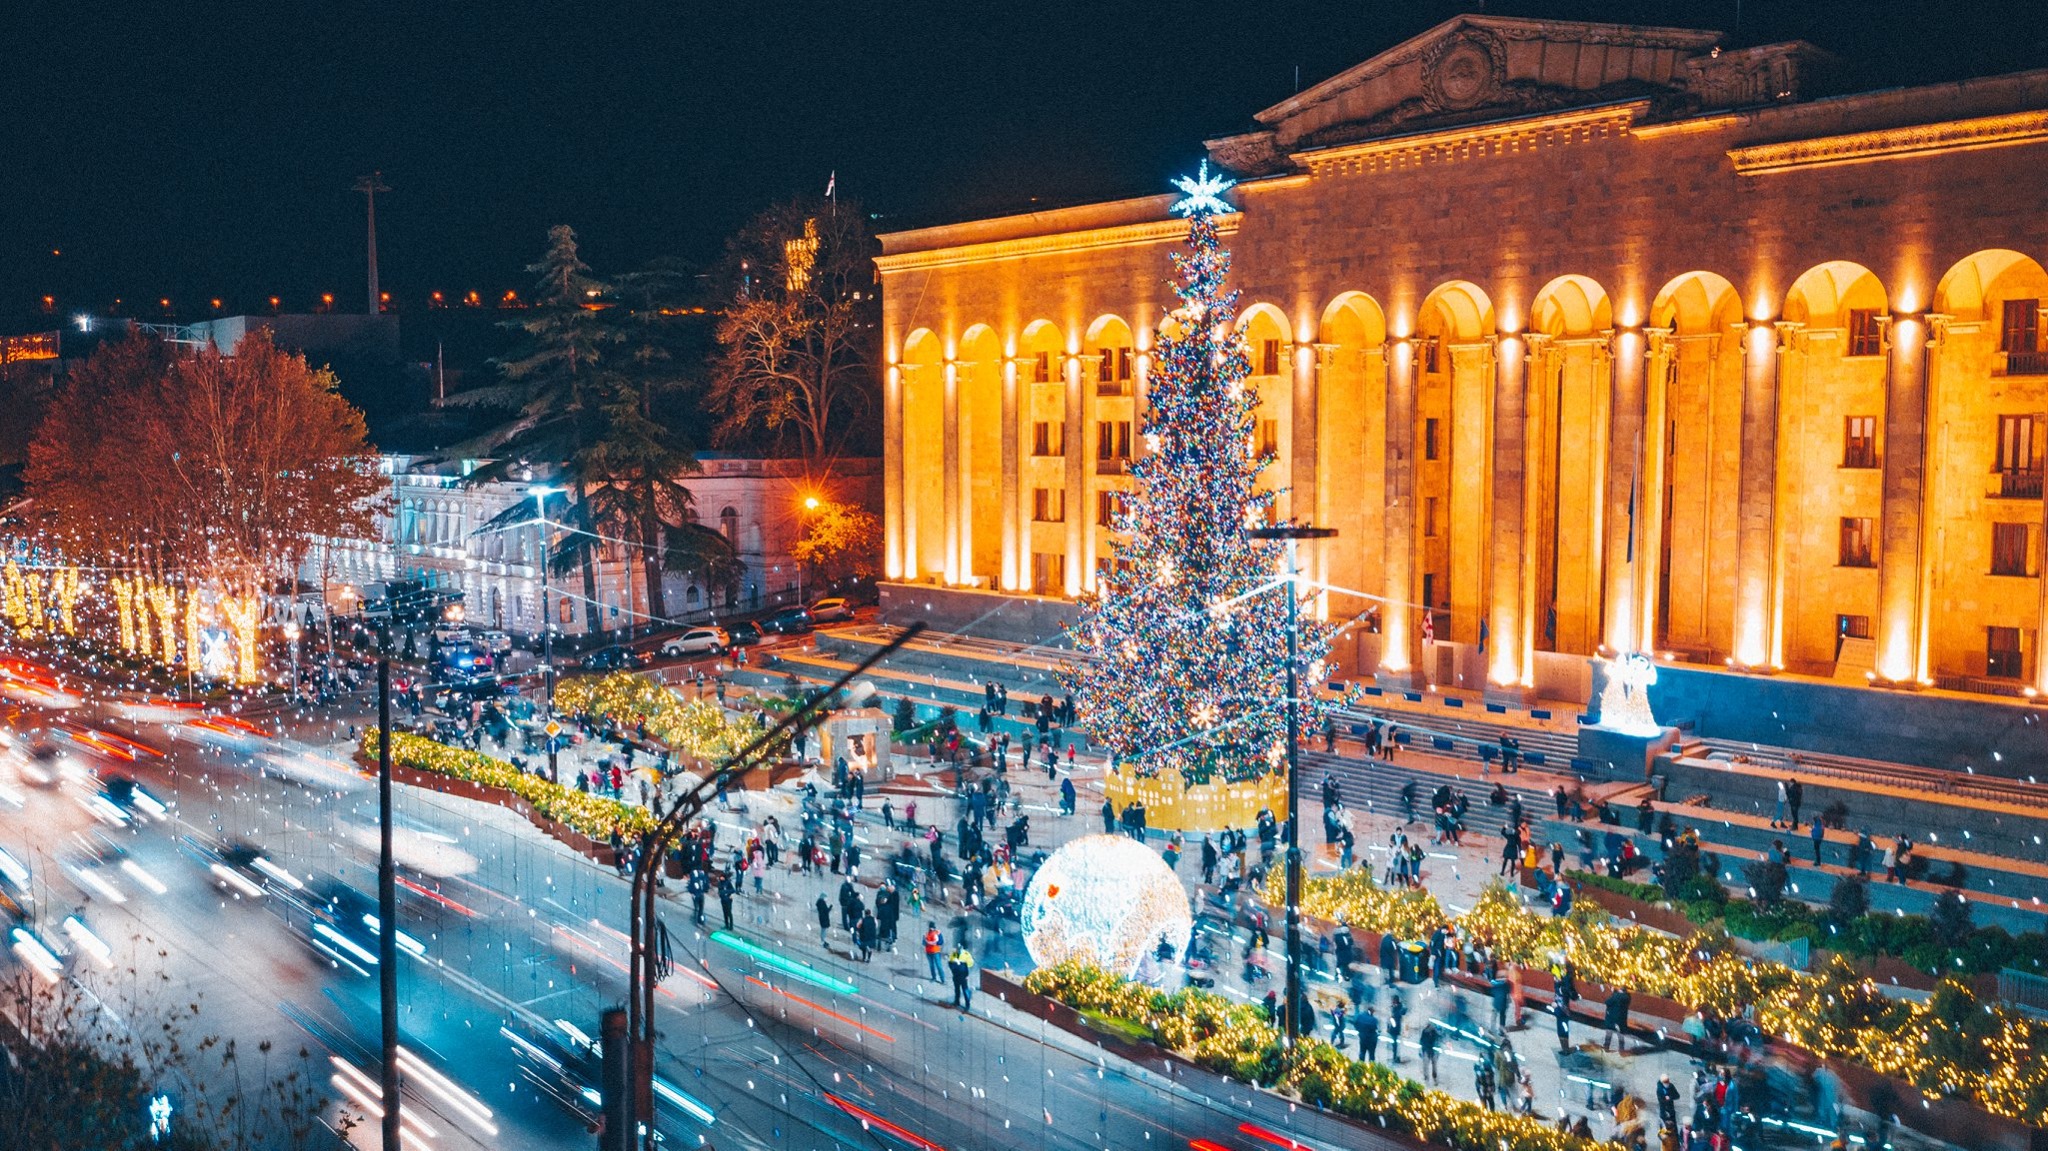 Tbilisi’s Holiday Lights Bring Joy Amidst the Challenges of 2020